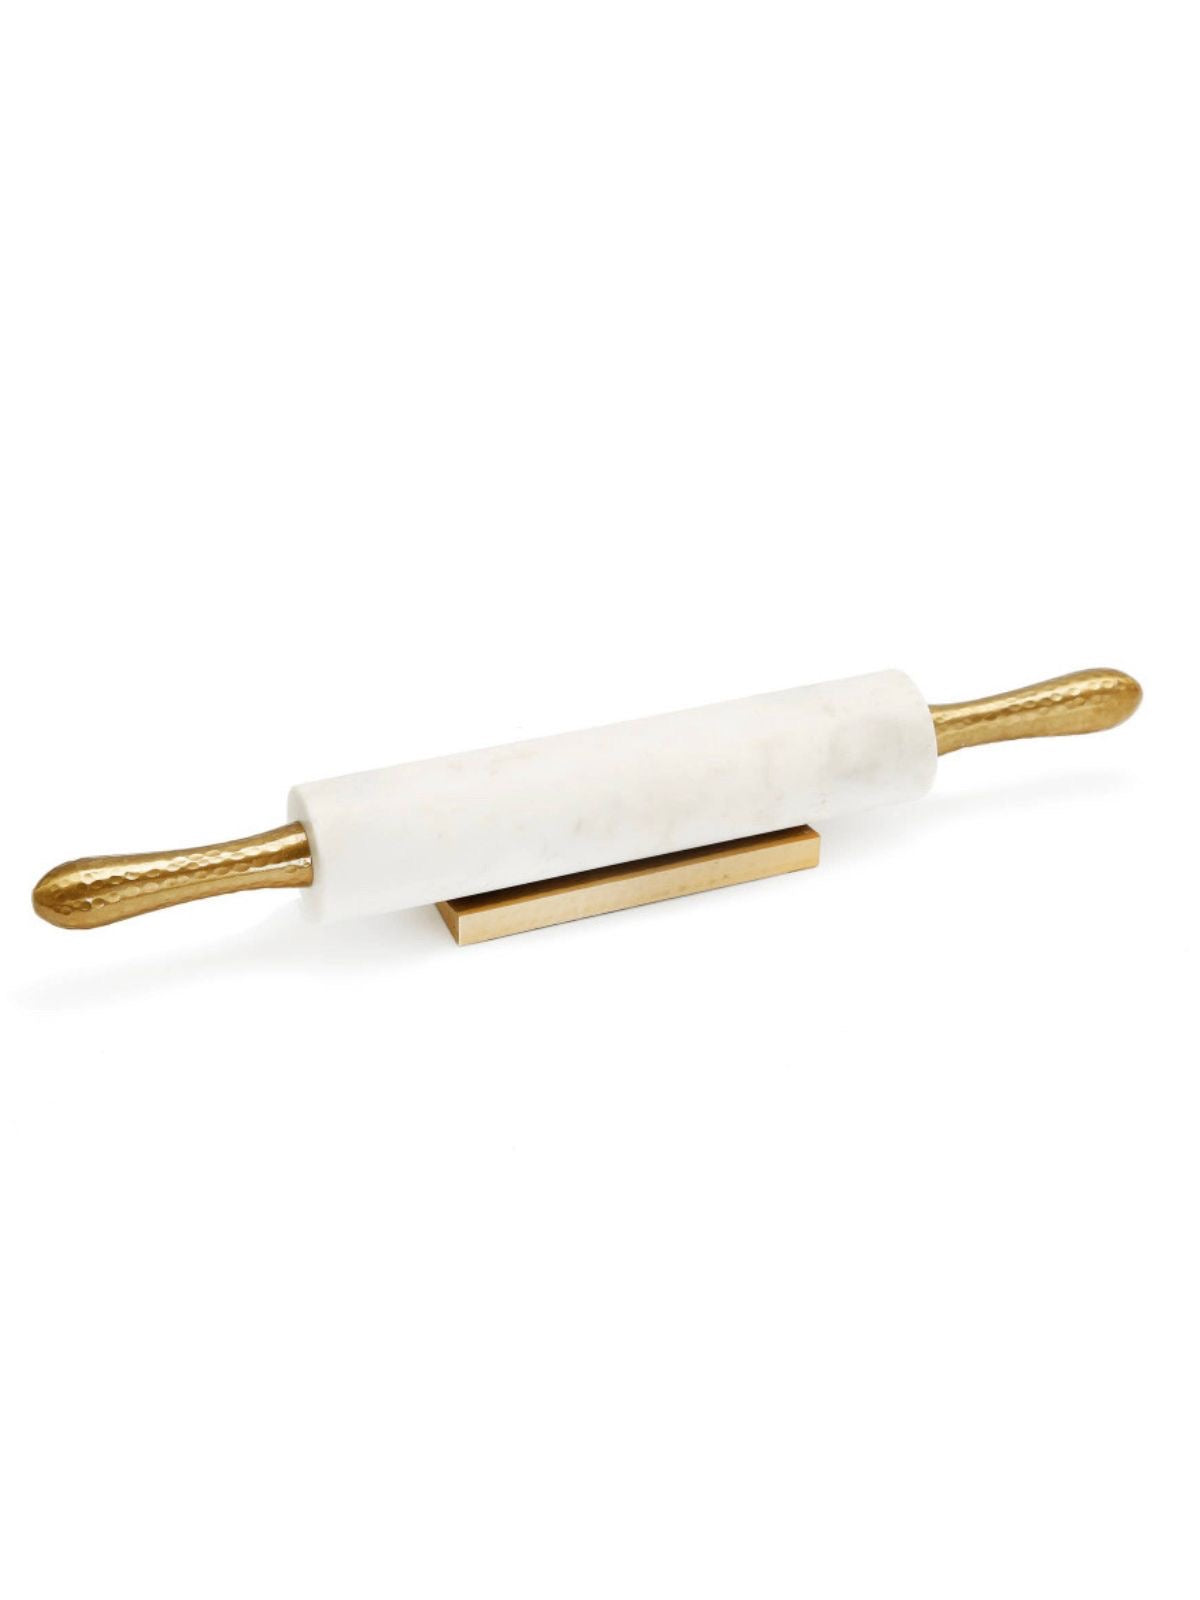 100% marble rolling pin with stainless steel gold-tone hammered textured handles and base.